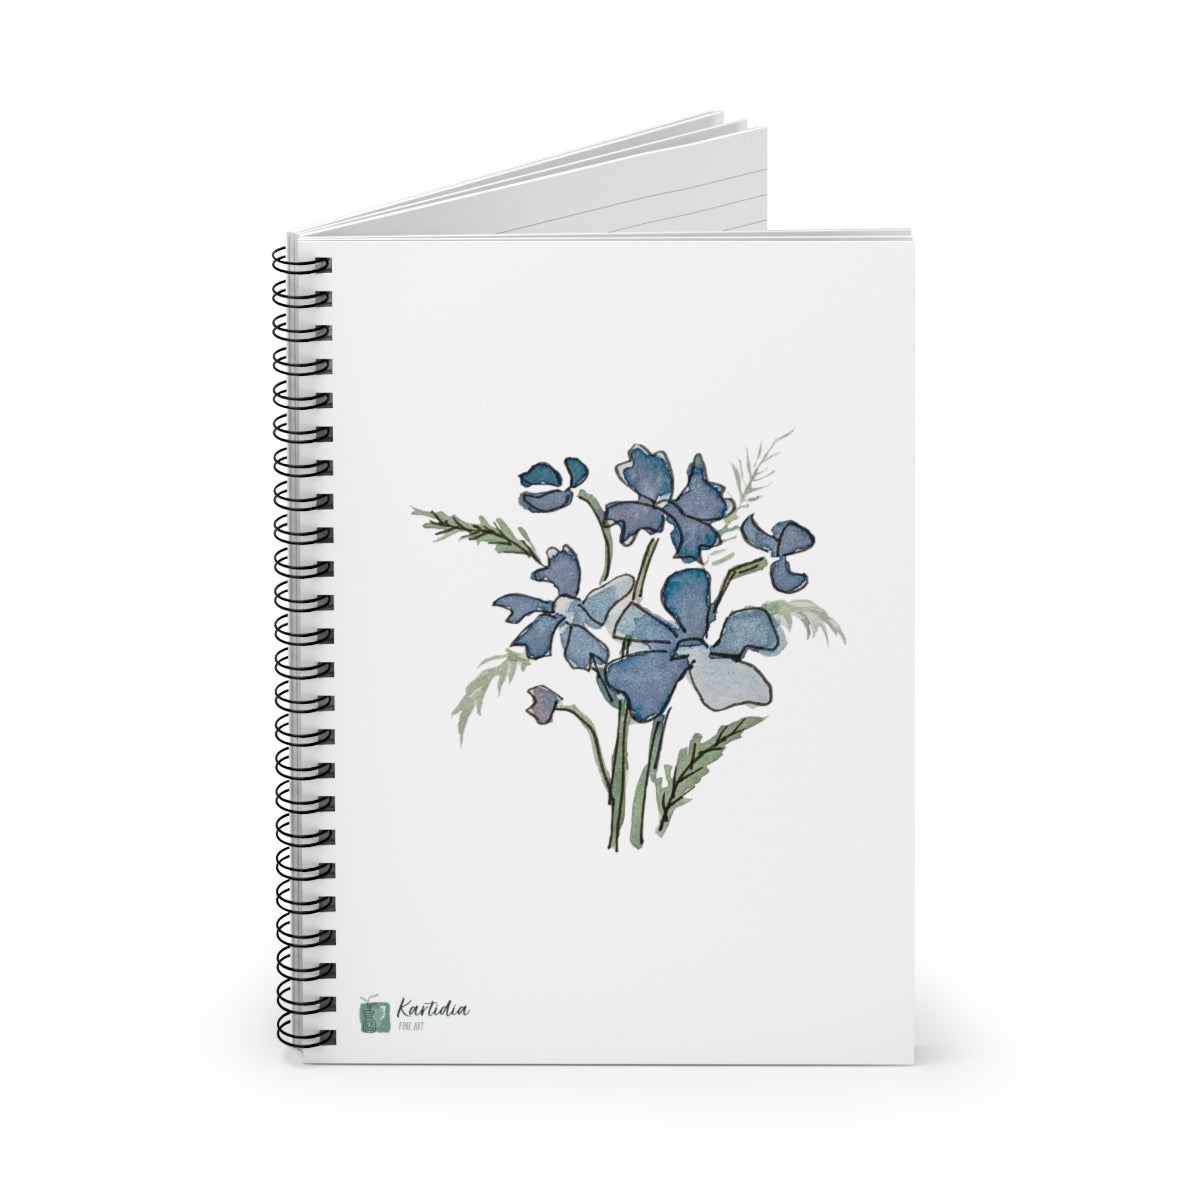 "Blue Cosmos" Spiral Notebook - Ruled Line